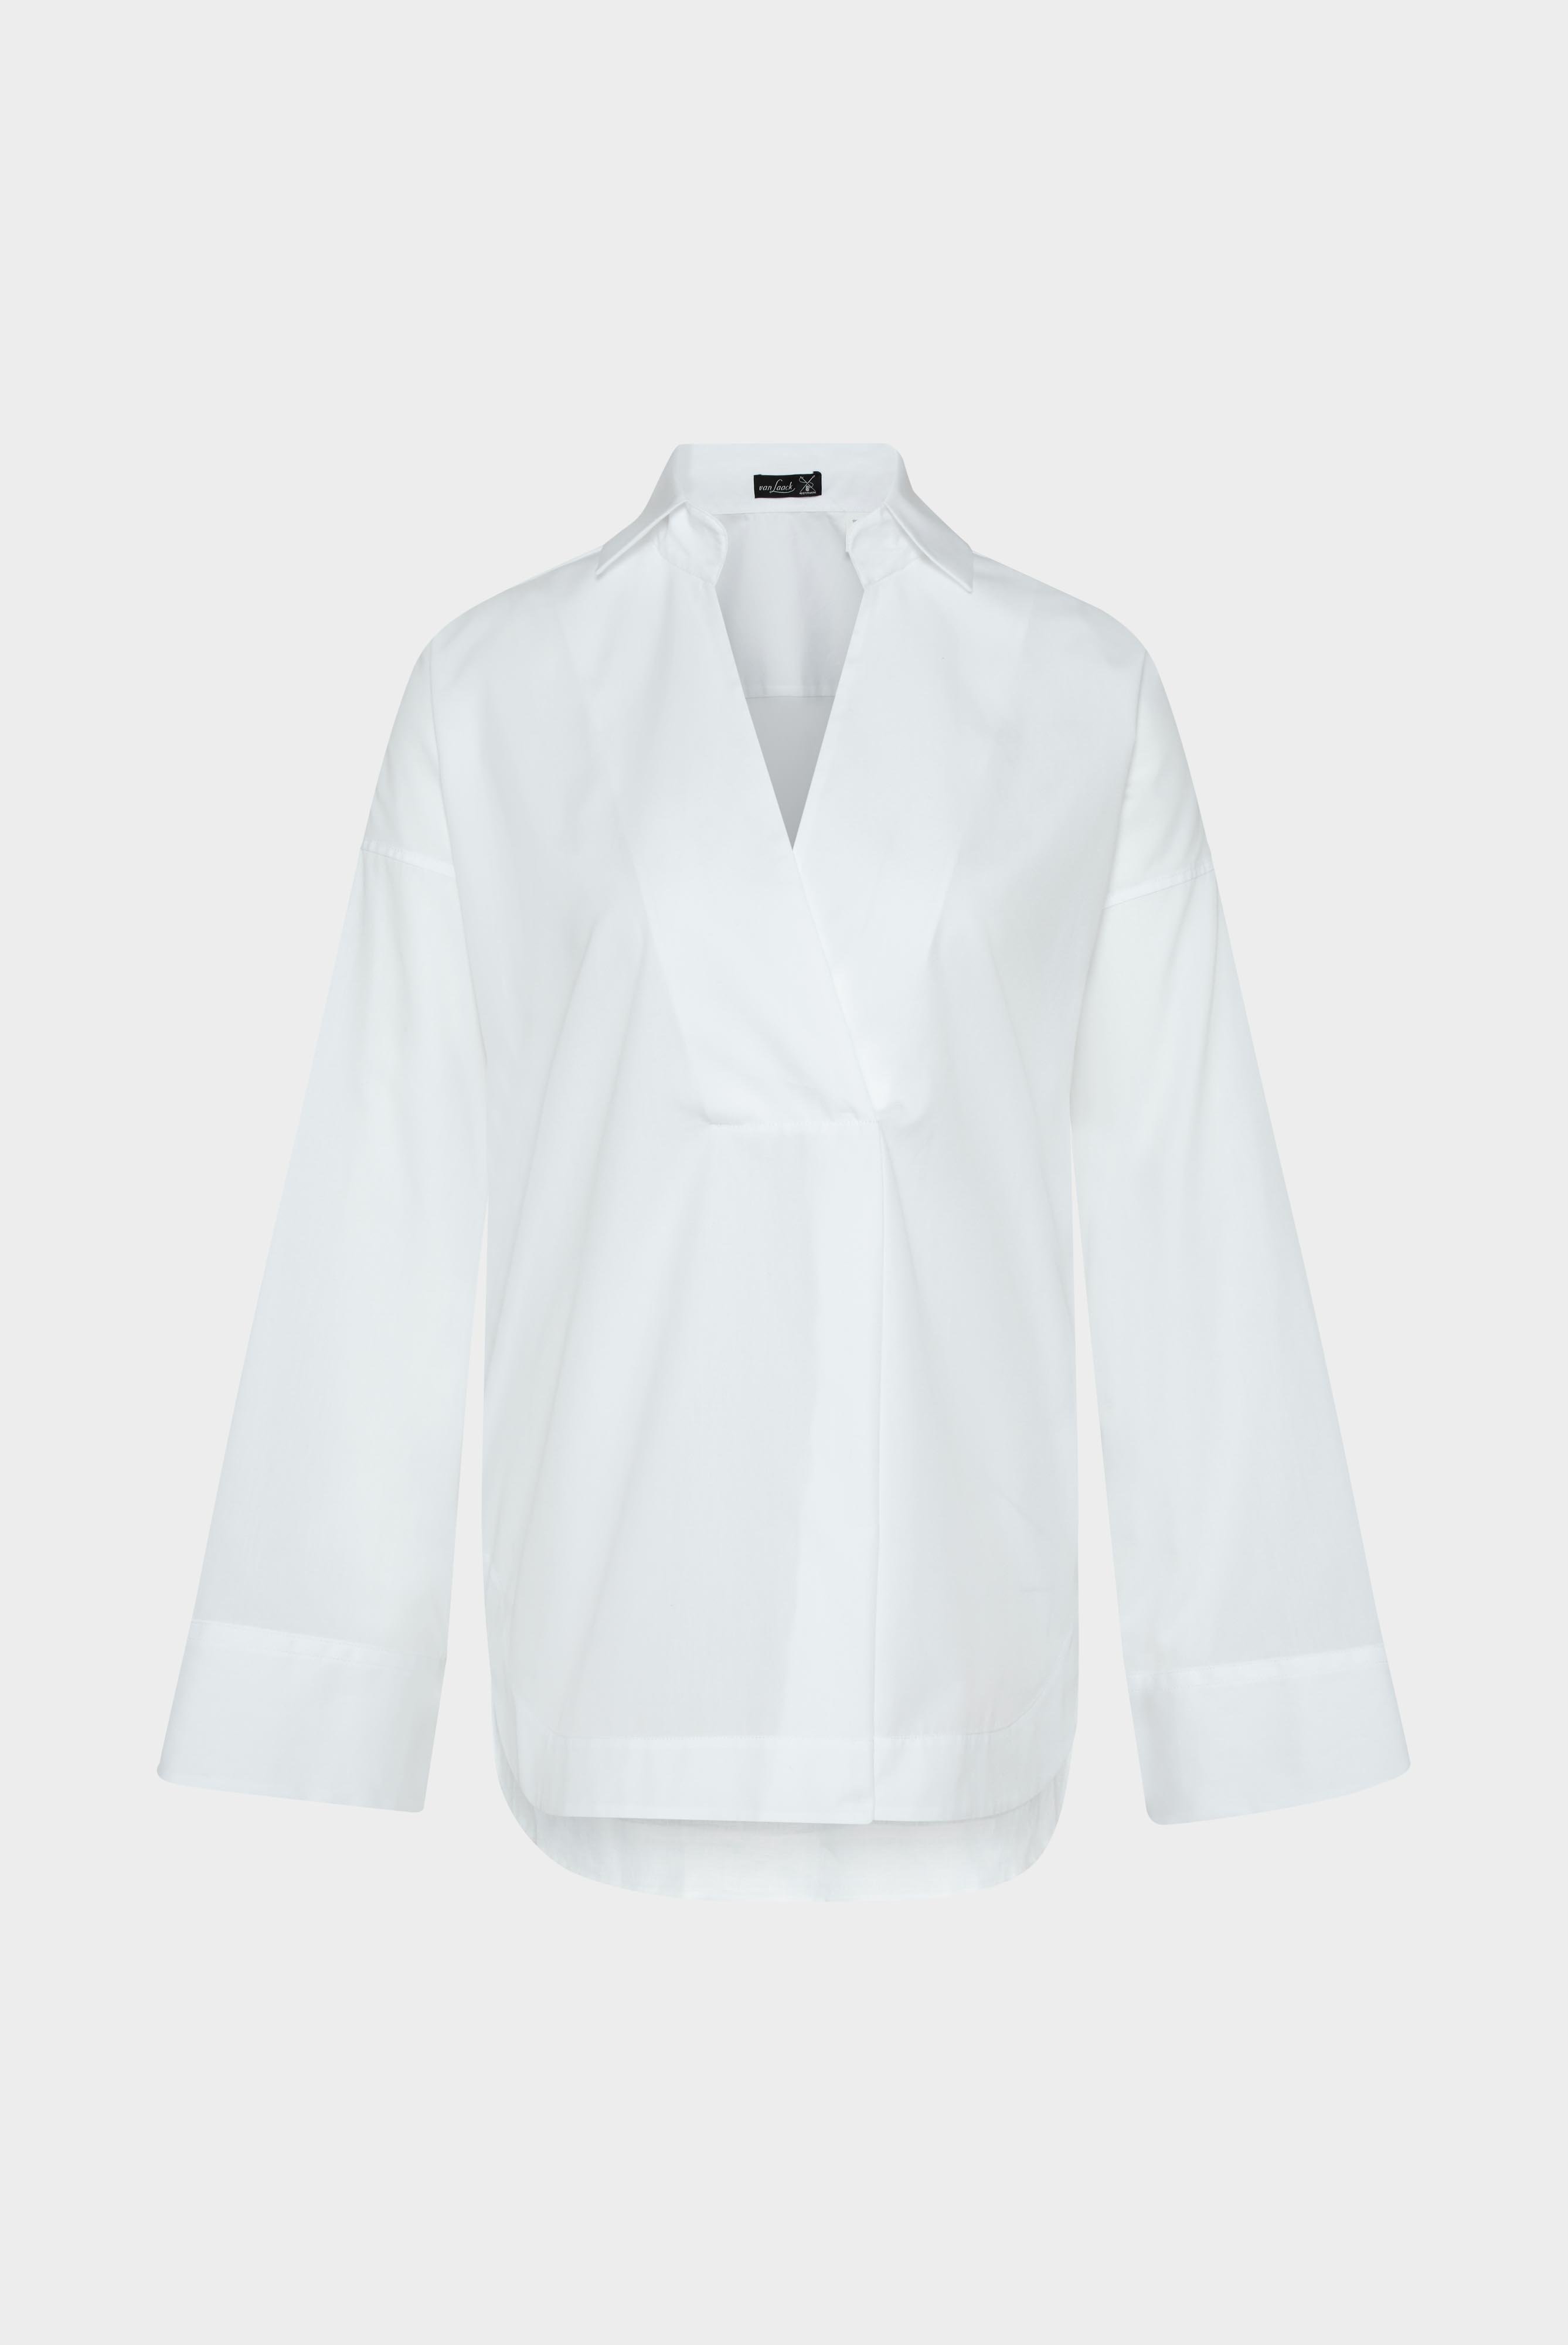 Business Blouses+Cotton poplin blouse with wide cuffs white+05.526G.49.130648.000.38